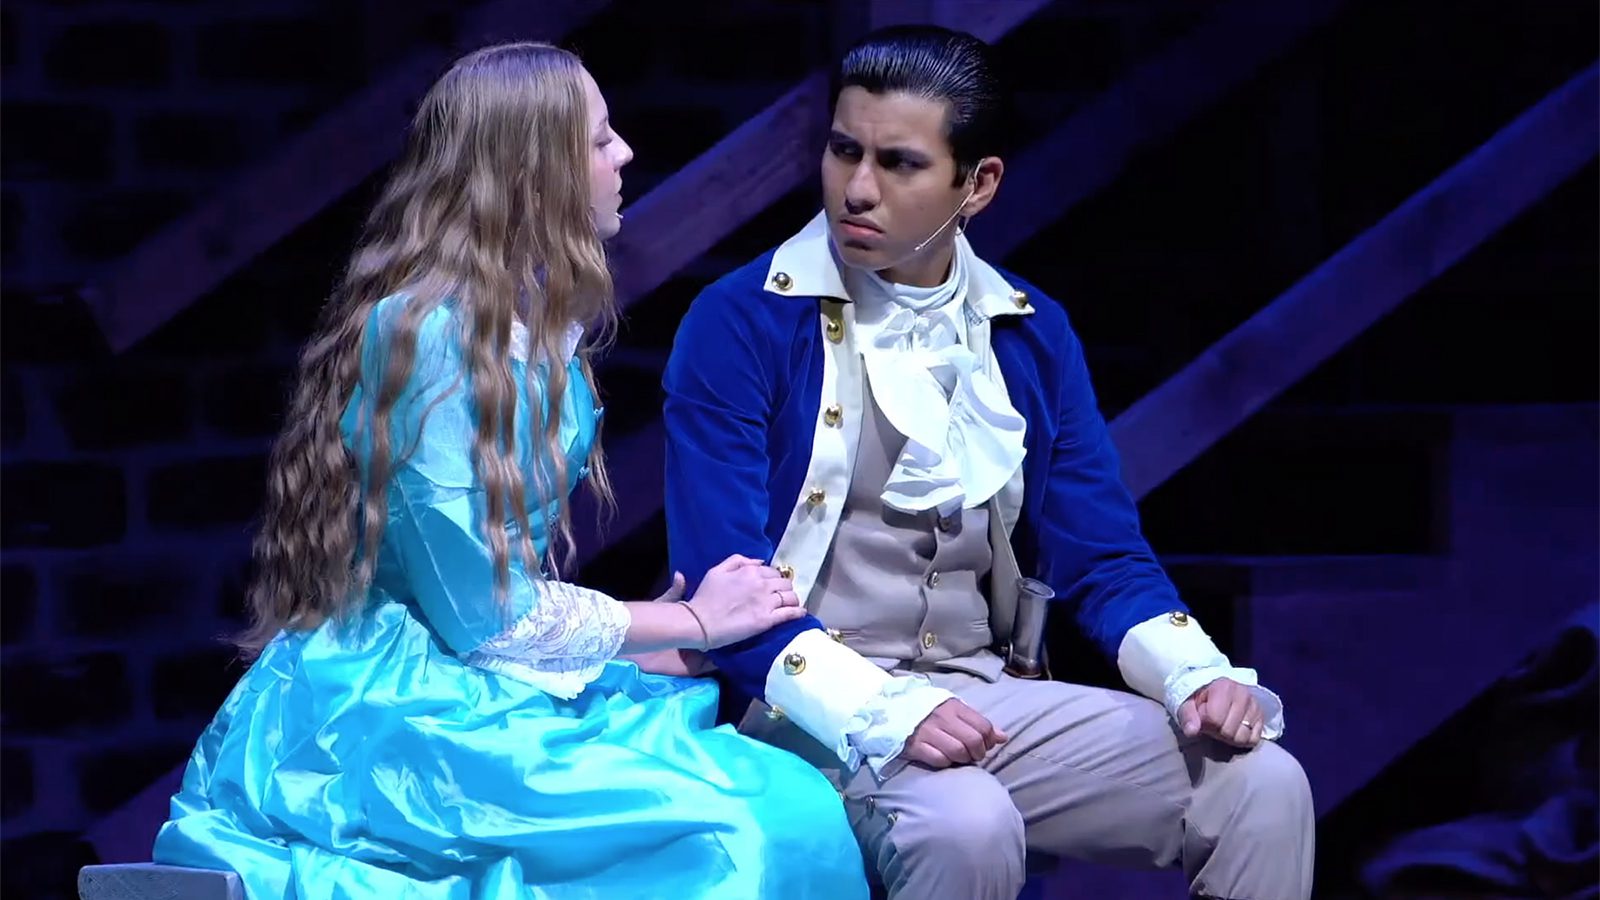 A scene between Alexander Hamilton and his wife, Eliza, in the The Door Church's unauthorized production of the musical "Hamilton," in McAllen, Texas. Video screen grab